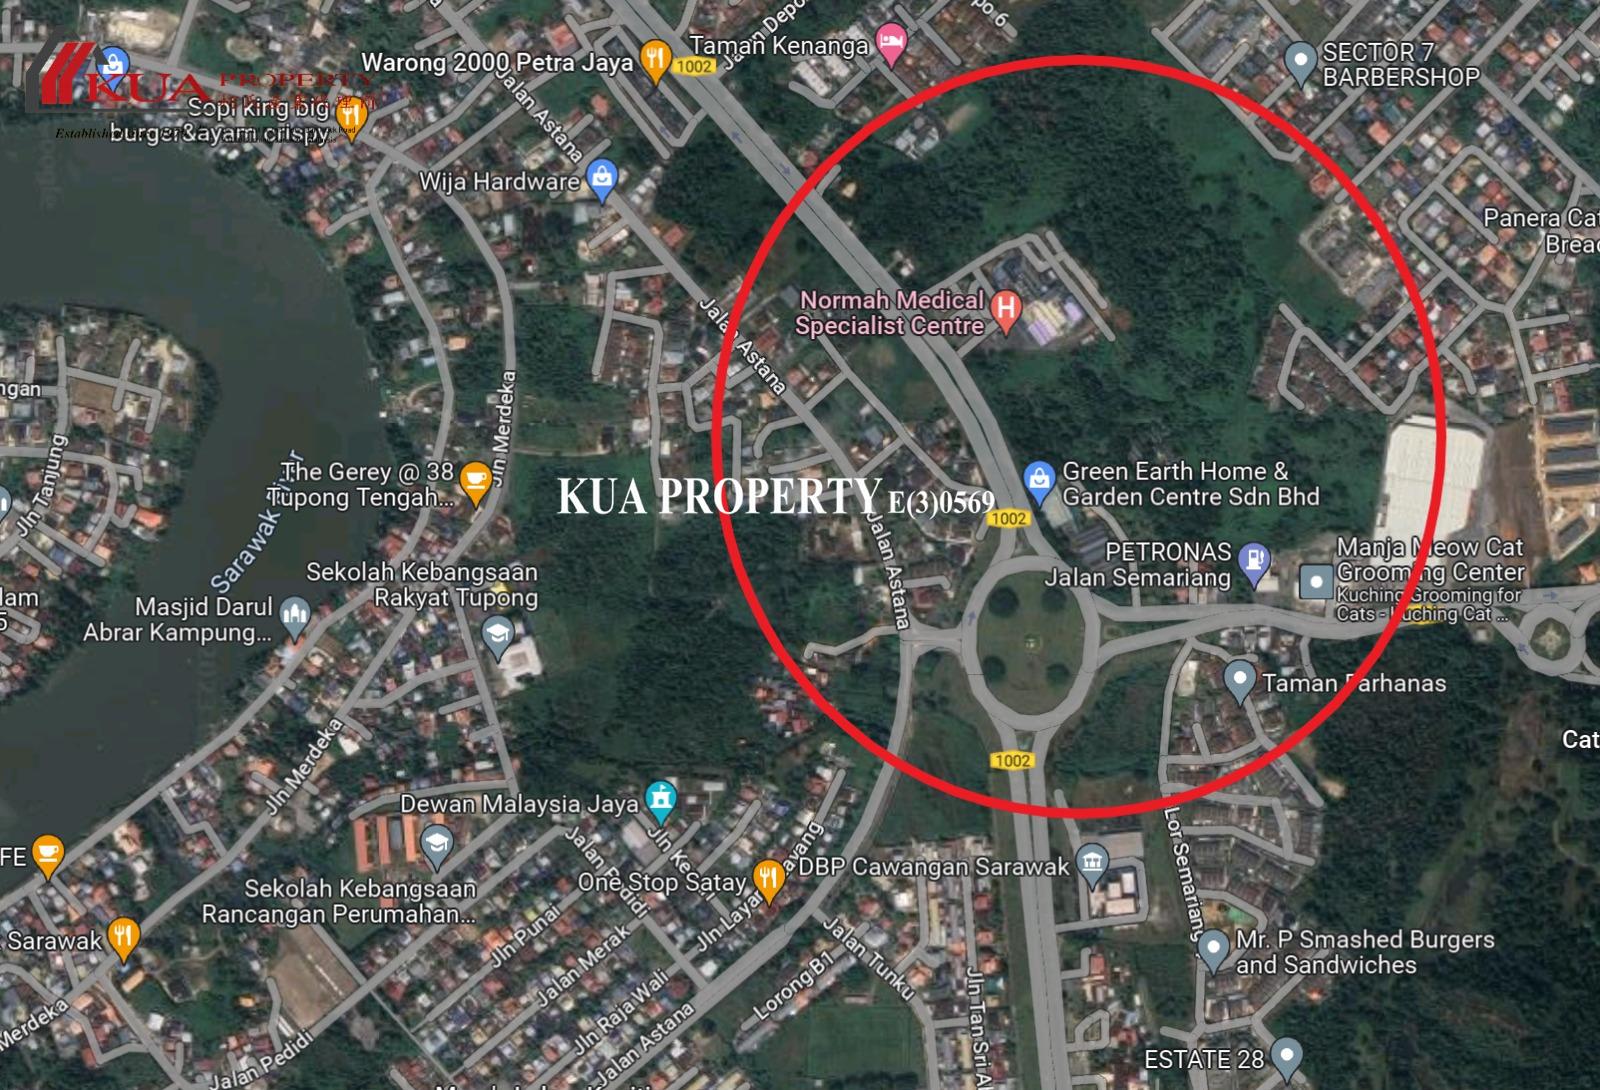 First Lot Land For Sale! 📍Located next to Normah Medical Specialist Centre Petra Jaya